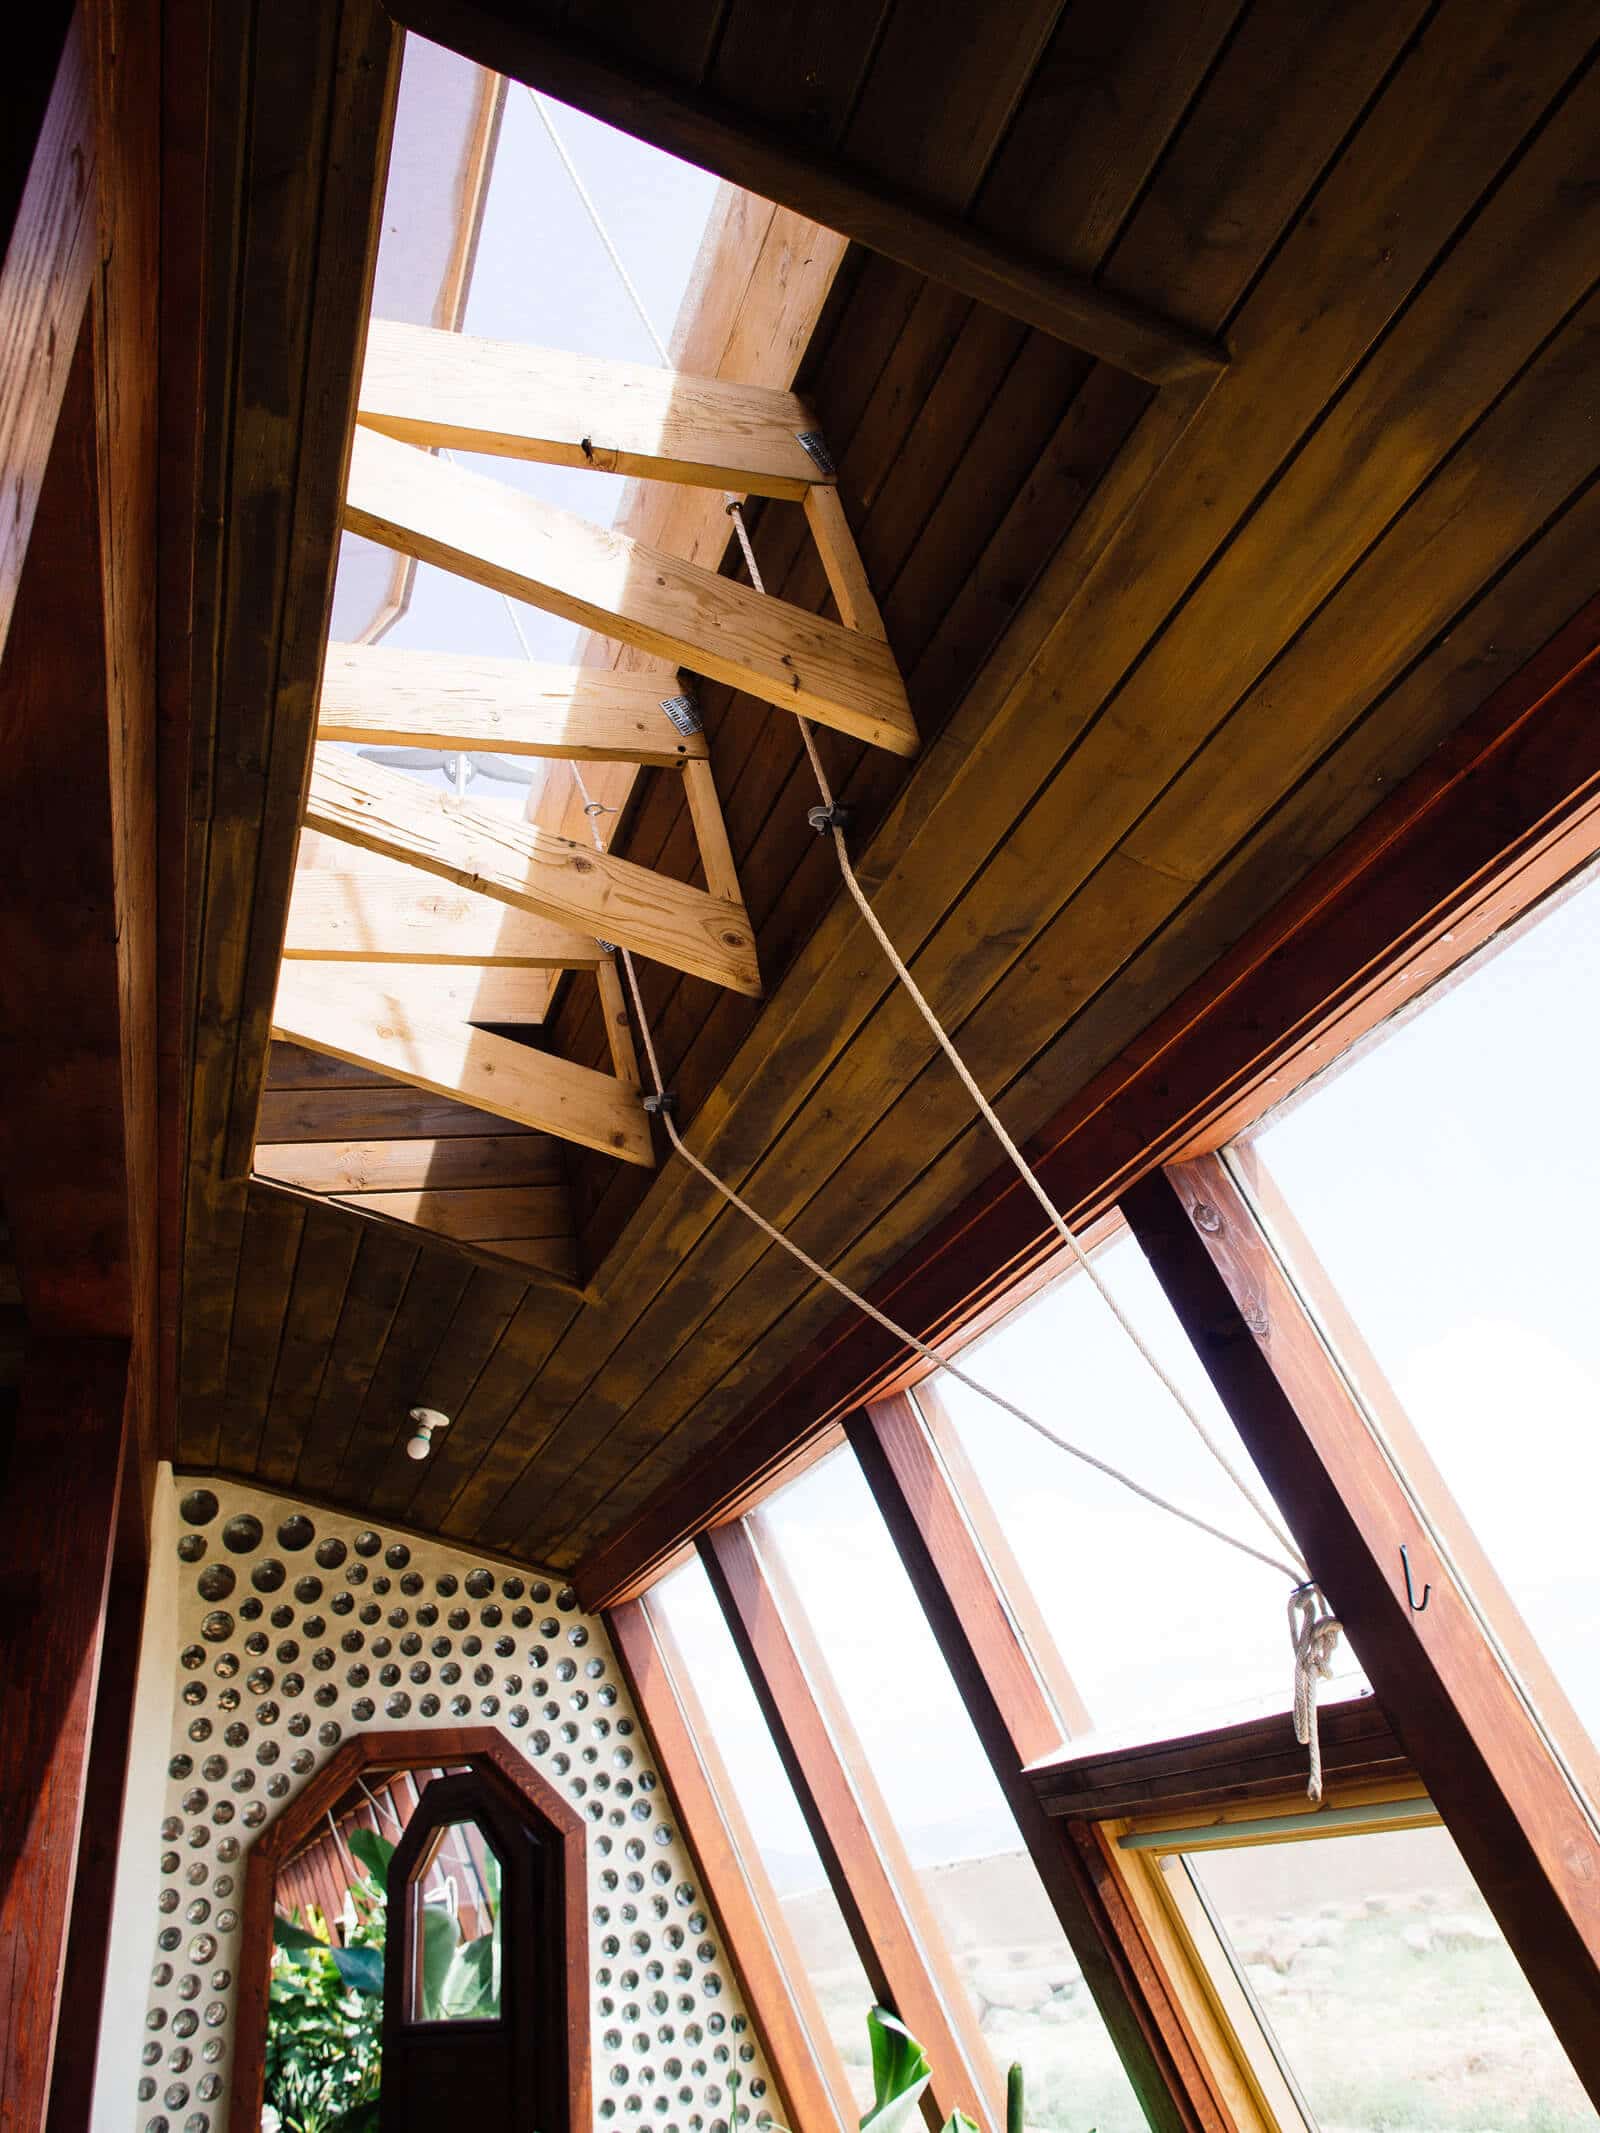 Hand-cranked skylights in an Earthship greenhouse